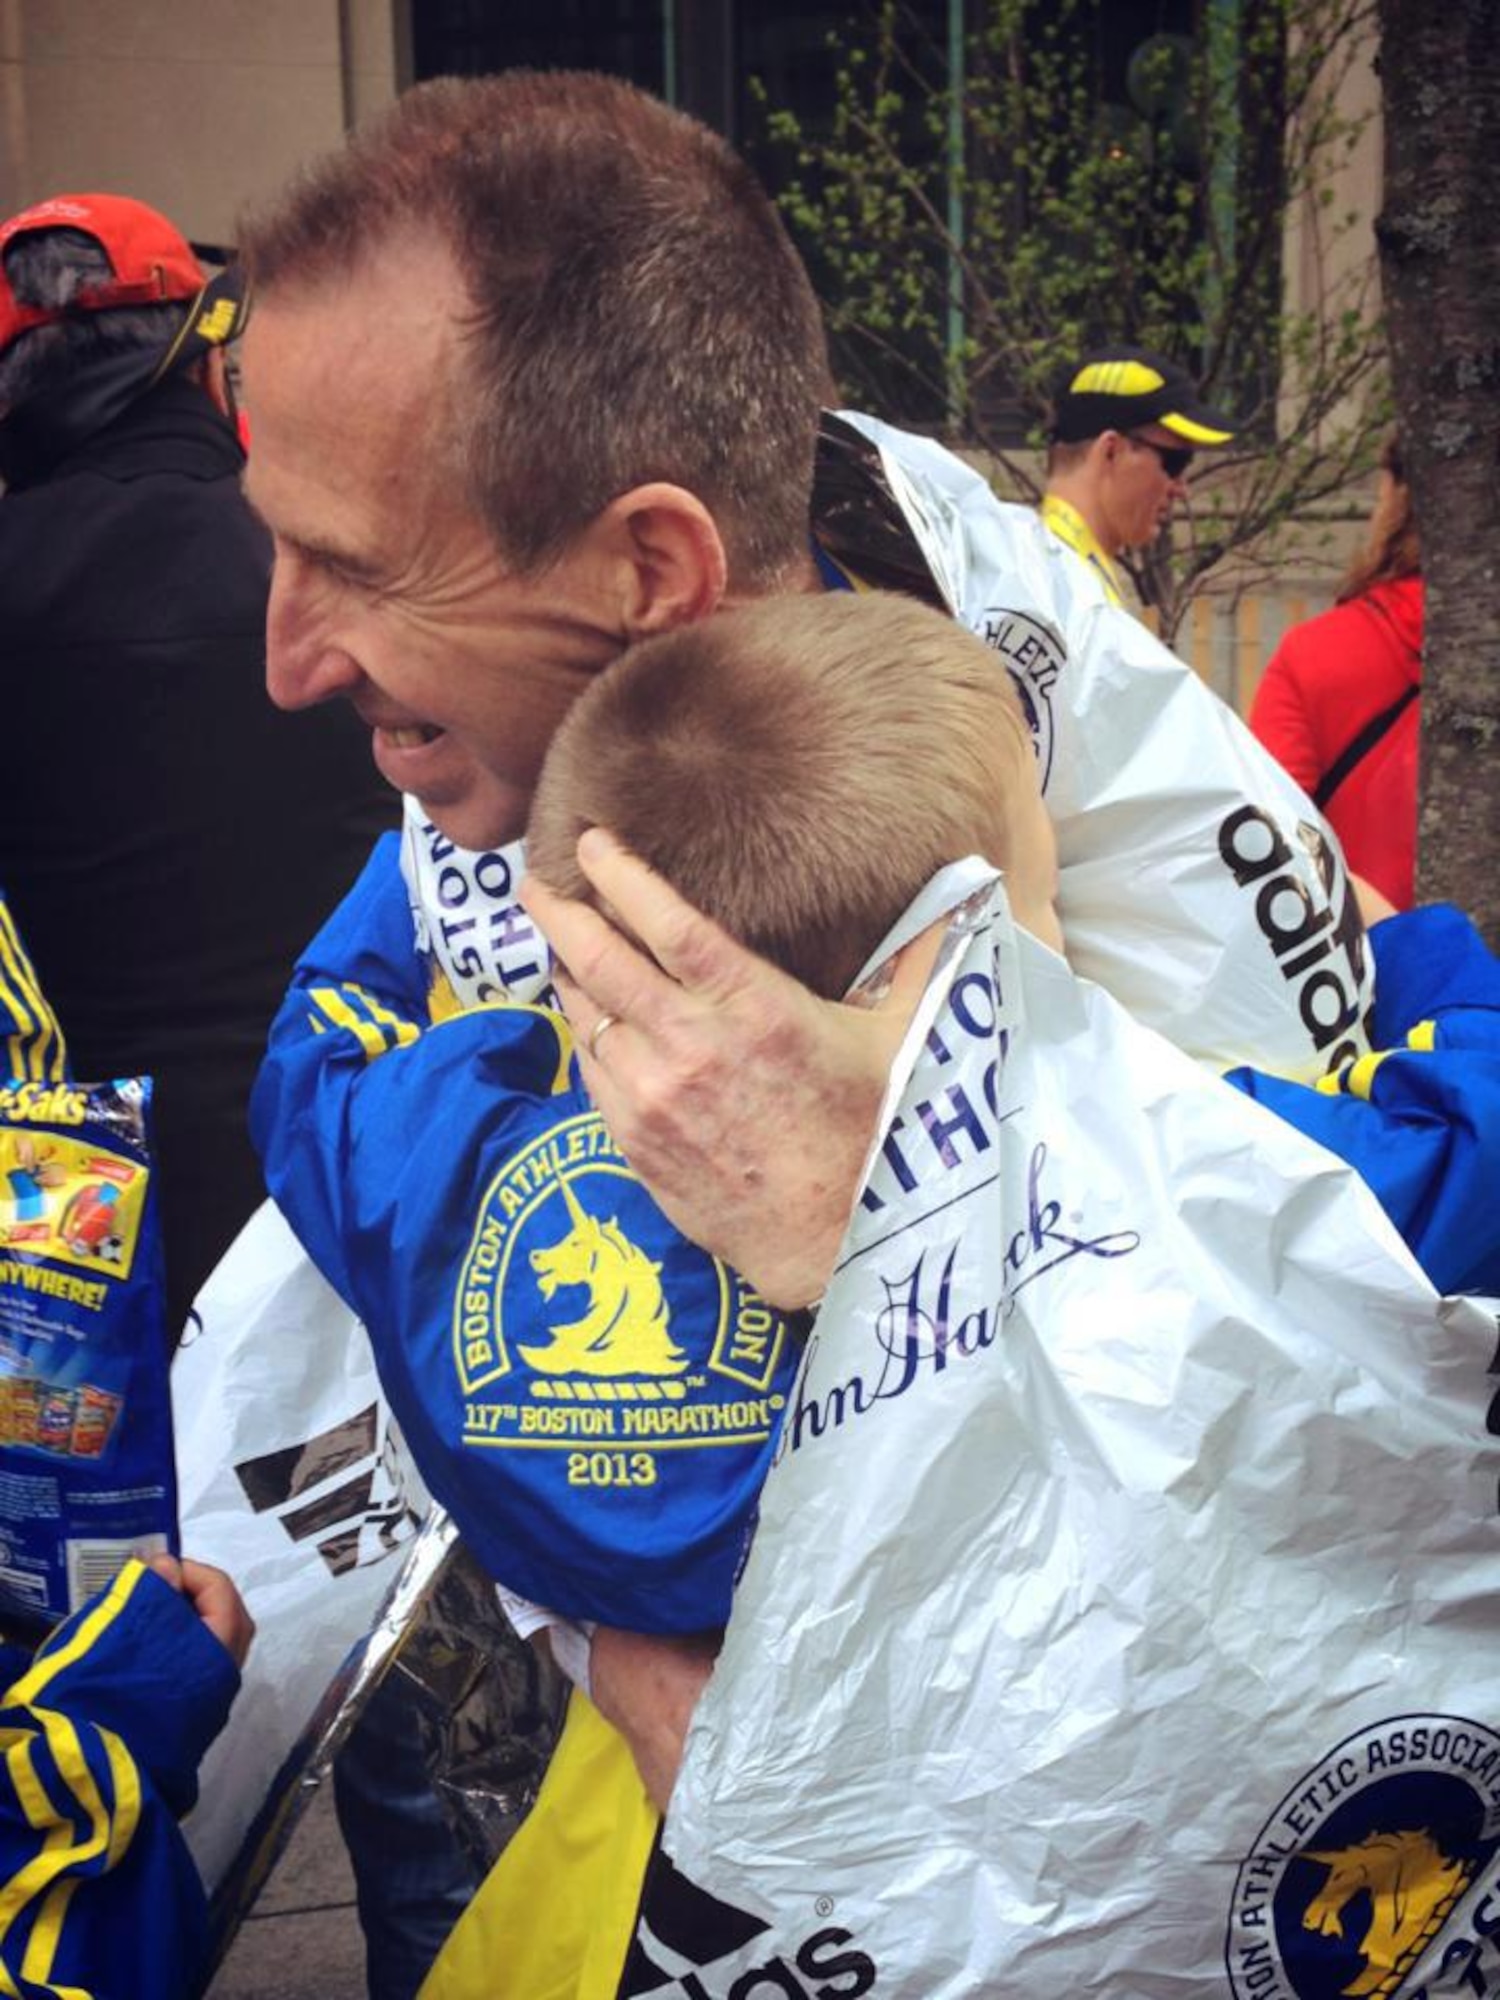 Dave Nickell, unit deployment manager with the 477th Fighter Group at Joint Base Elmendorf-Richardson, Alaska, embraces his family after completing his first Boston Marathon April, 2013, shortly before a bomb went of at the finish line. Nickell remembers the Boston Marathon tragedy of 2013 while training for the 2017 race.